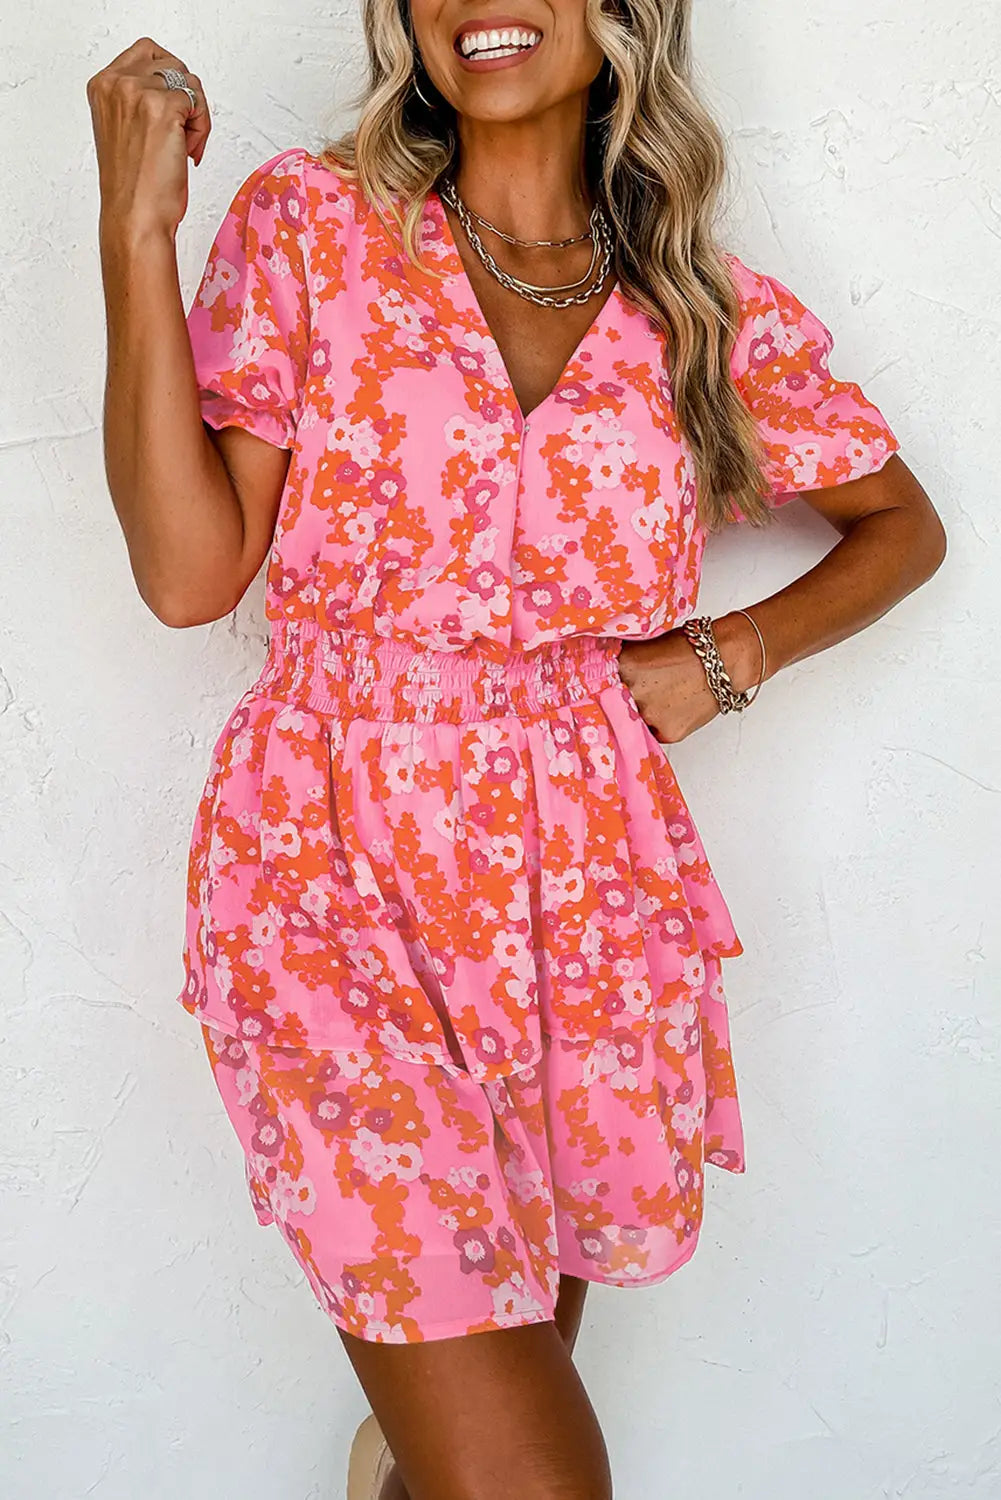 Pink floral v neck short ruffle tiered dress - s / 100% polyester - dresses